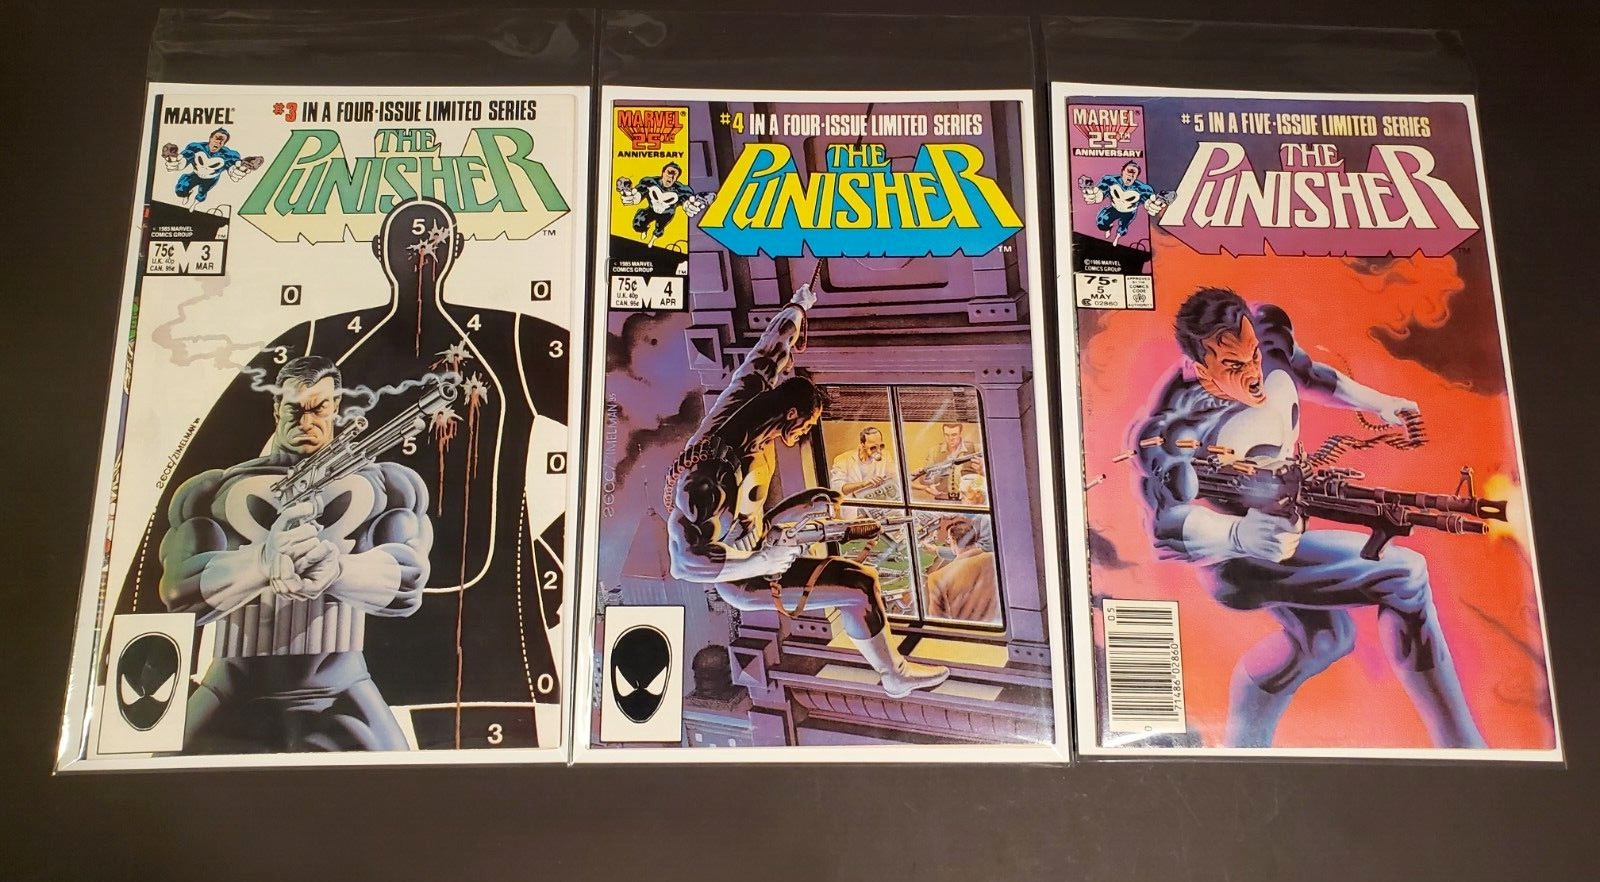 The Punisher #3-5 Limited Series (Marvel 1985) ☆ 3 Comic Lot ☆ Authentic ☆